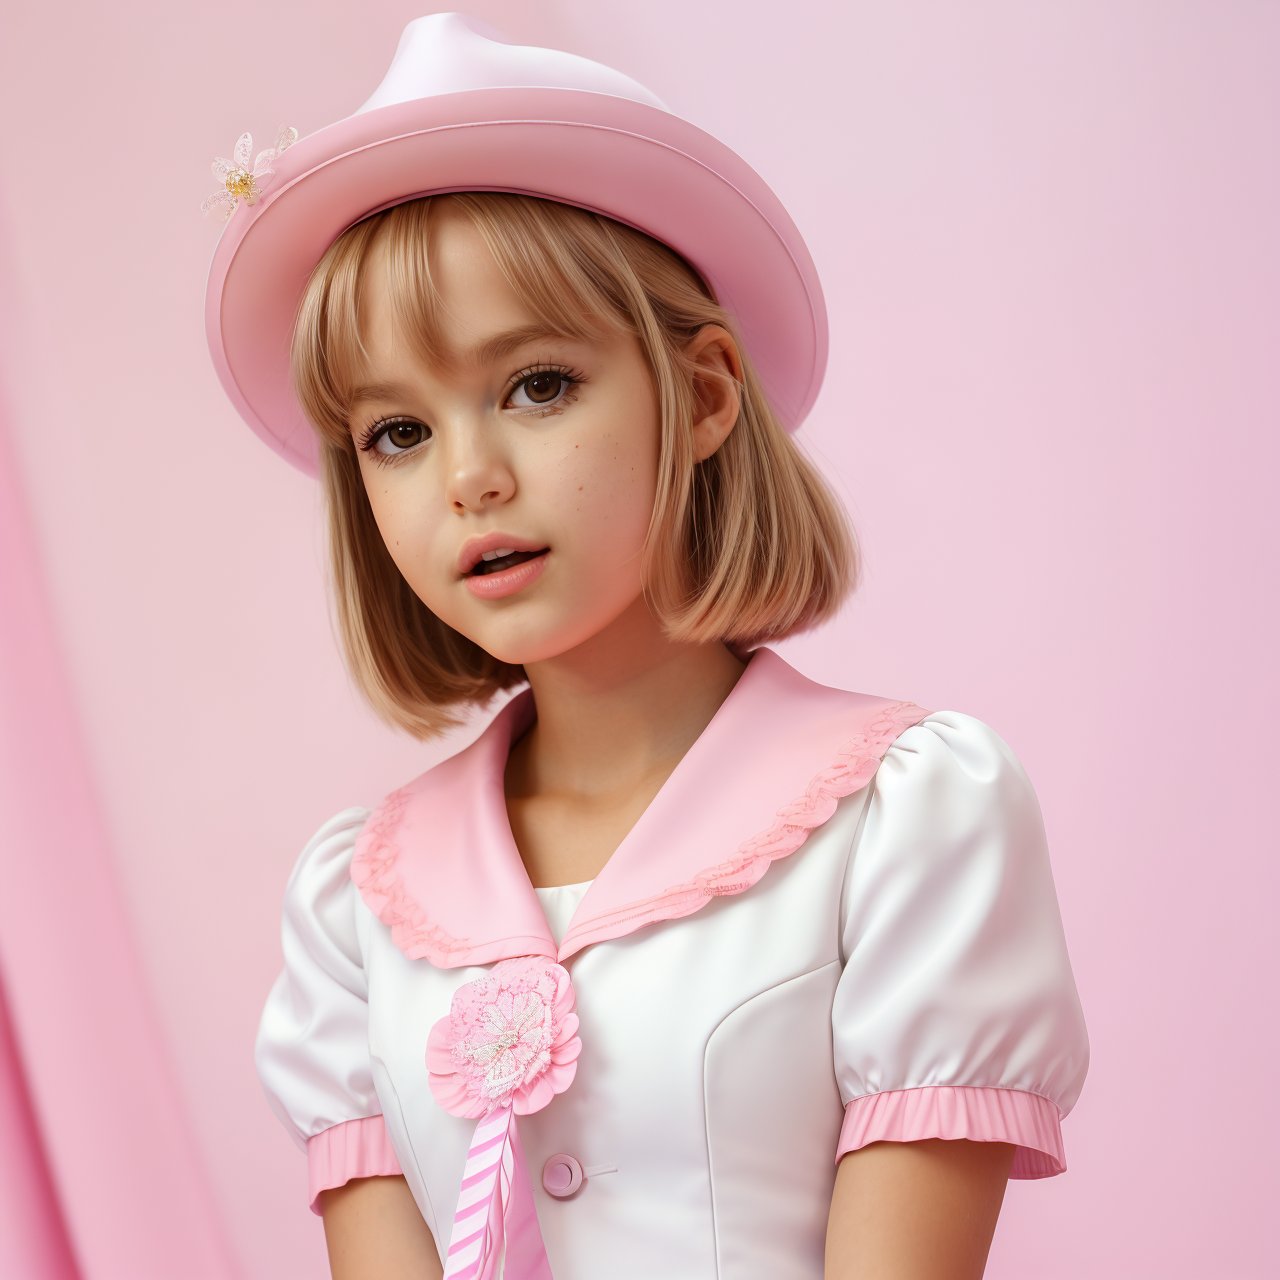 SFW, best quality, extra resolution, wallpaper, close up of stunning (AIDA_LoRA_AnC:1.24) <lora:AIDA_LoRA_AnC:0.87> in a school uniform and with a white hat standing next to the pink drape, pretty face, open mouth, cinematic, hyper realistic, studio photo, kkw-ph1, hdr, f1.6